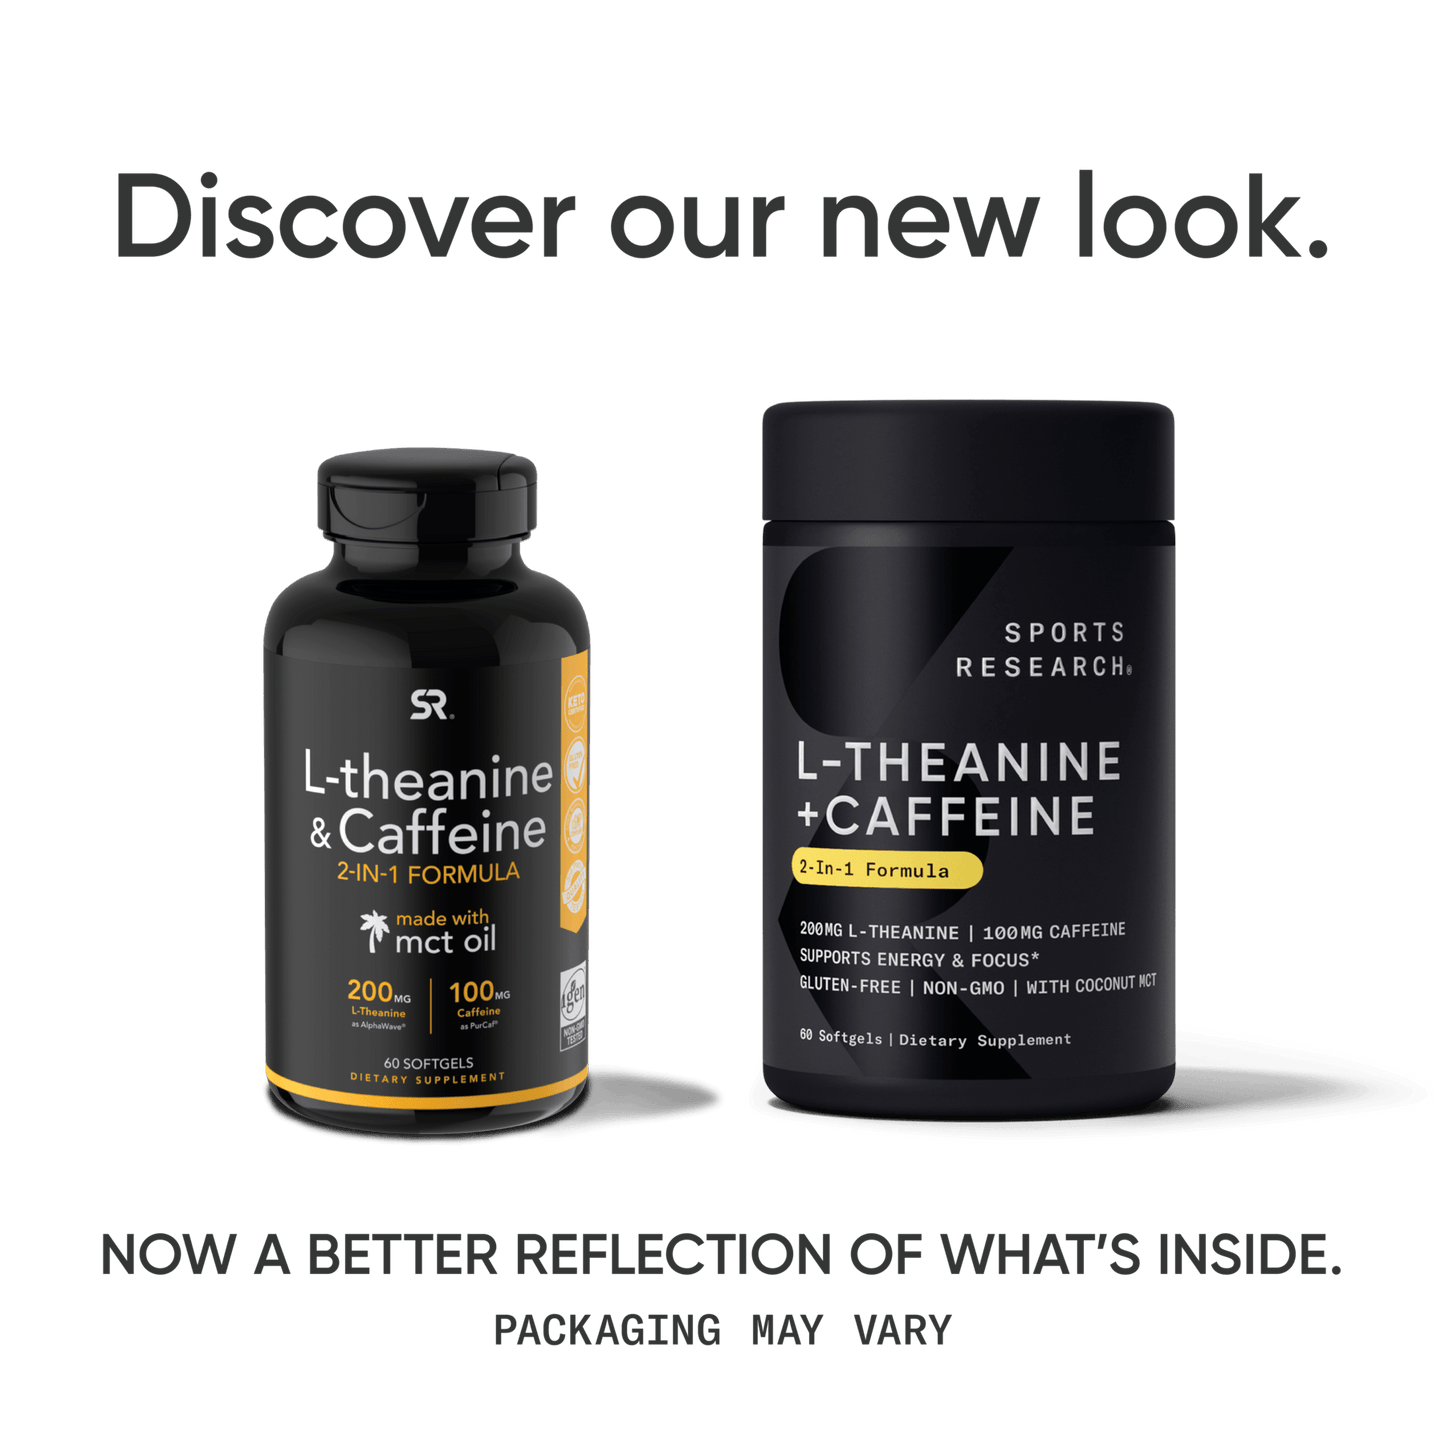 a bottle of L-Theanine + Caffeine by Sports Research.